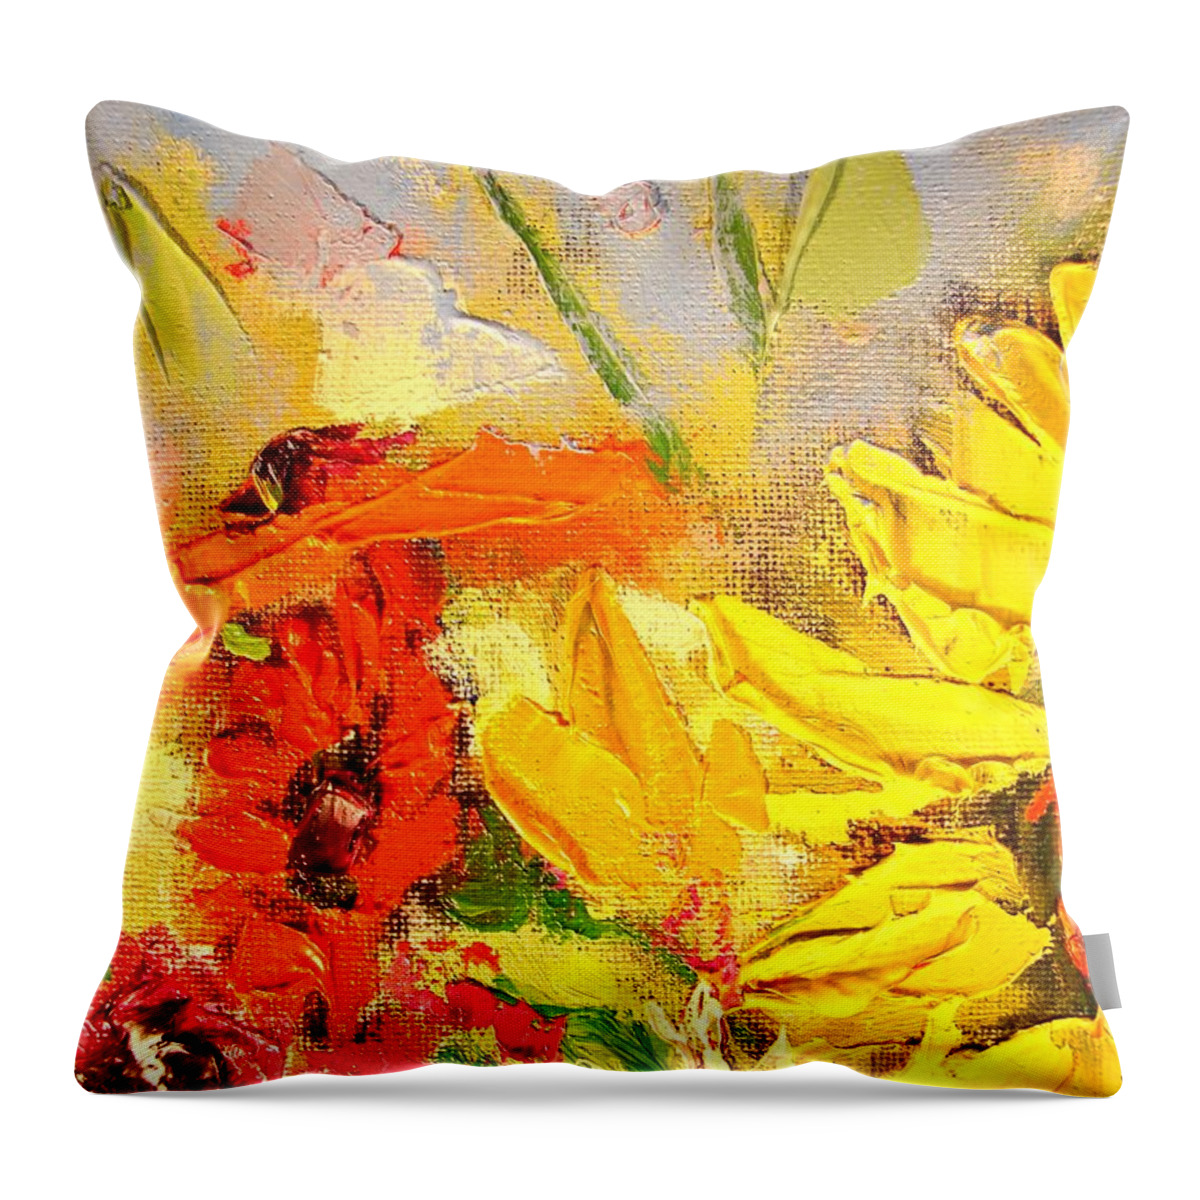 Sunflowers Throw Pillow featuring the painting Sunflower Detail by Ana Maria Edulescu